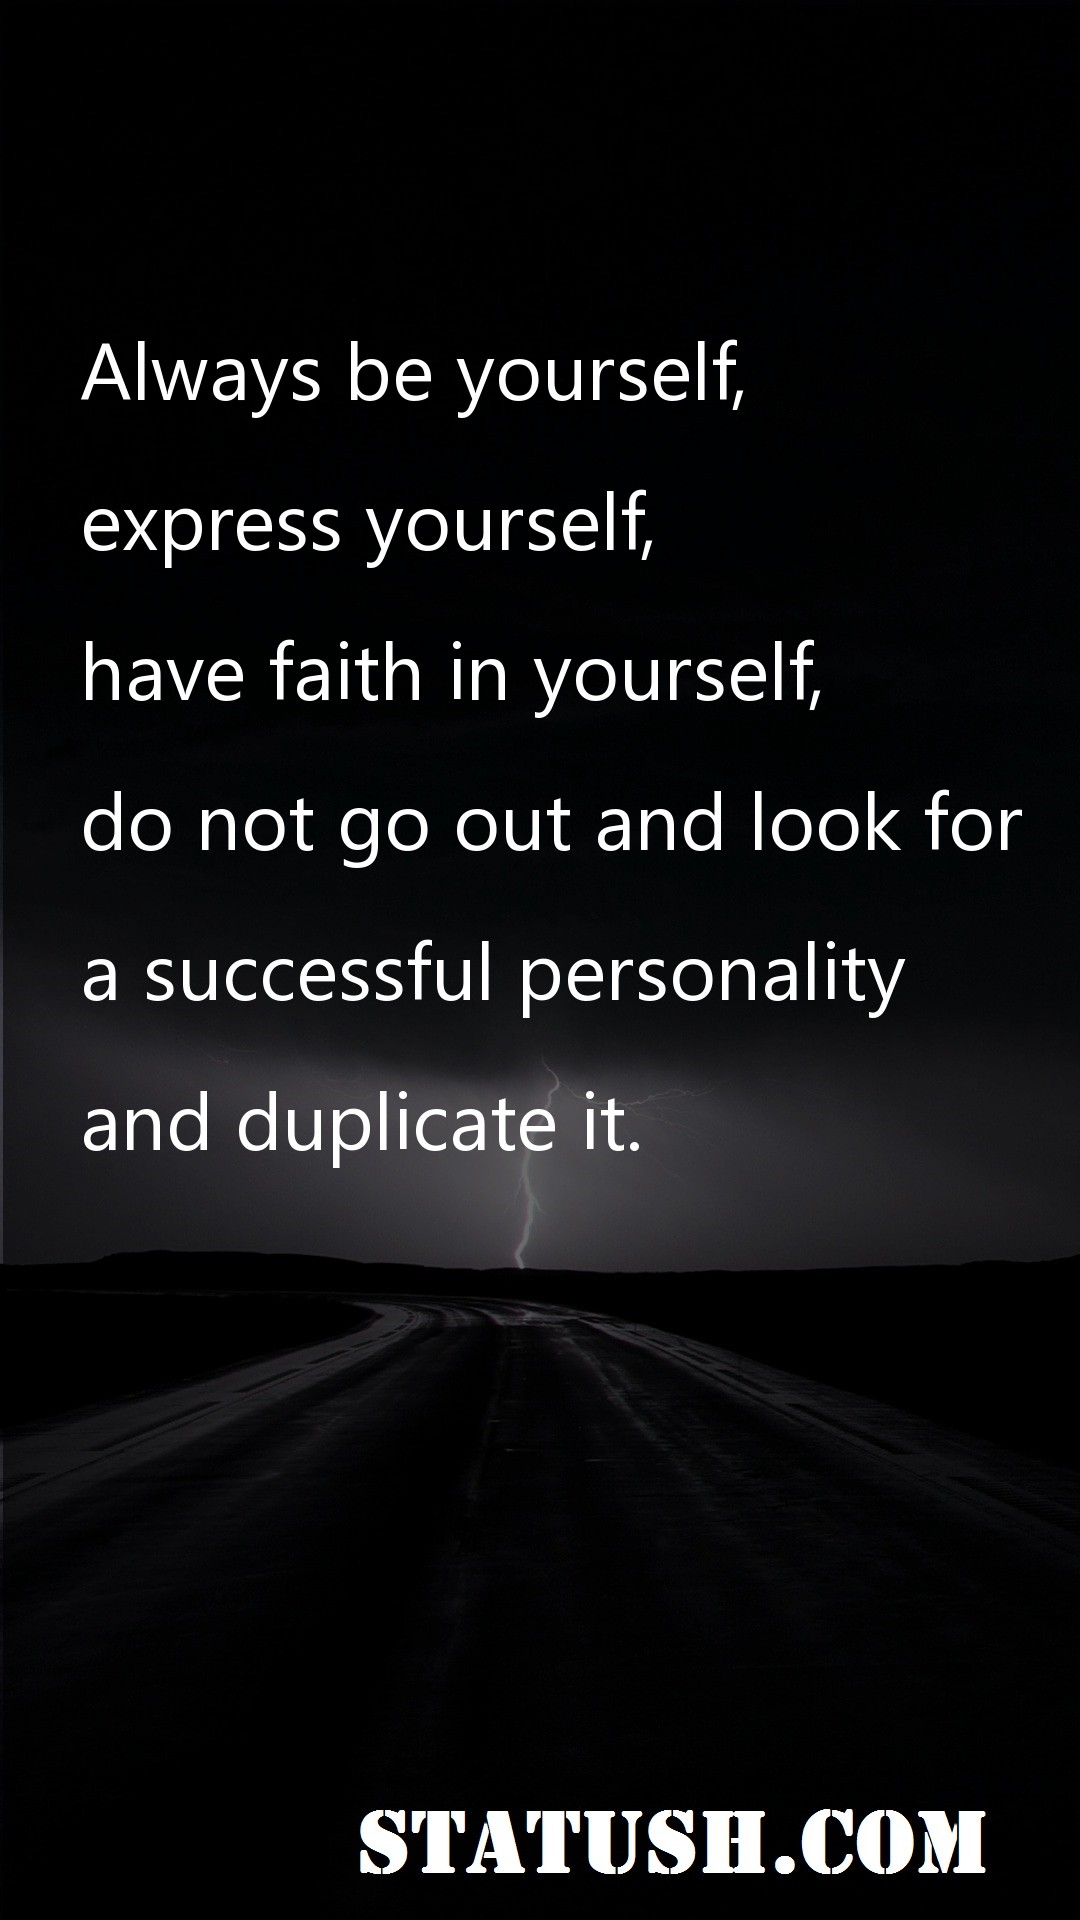 Always be yourself - Success Quotes at statush.com